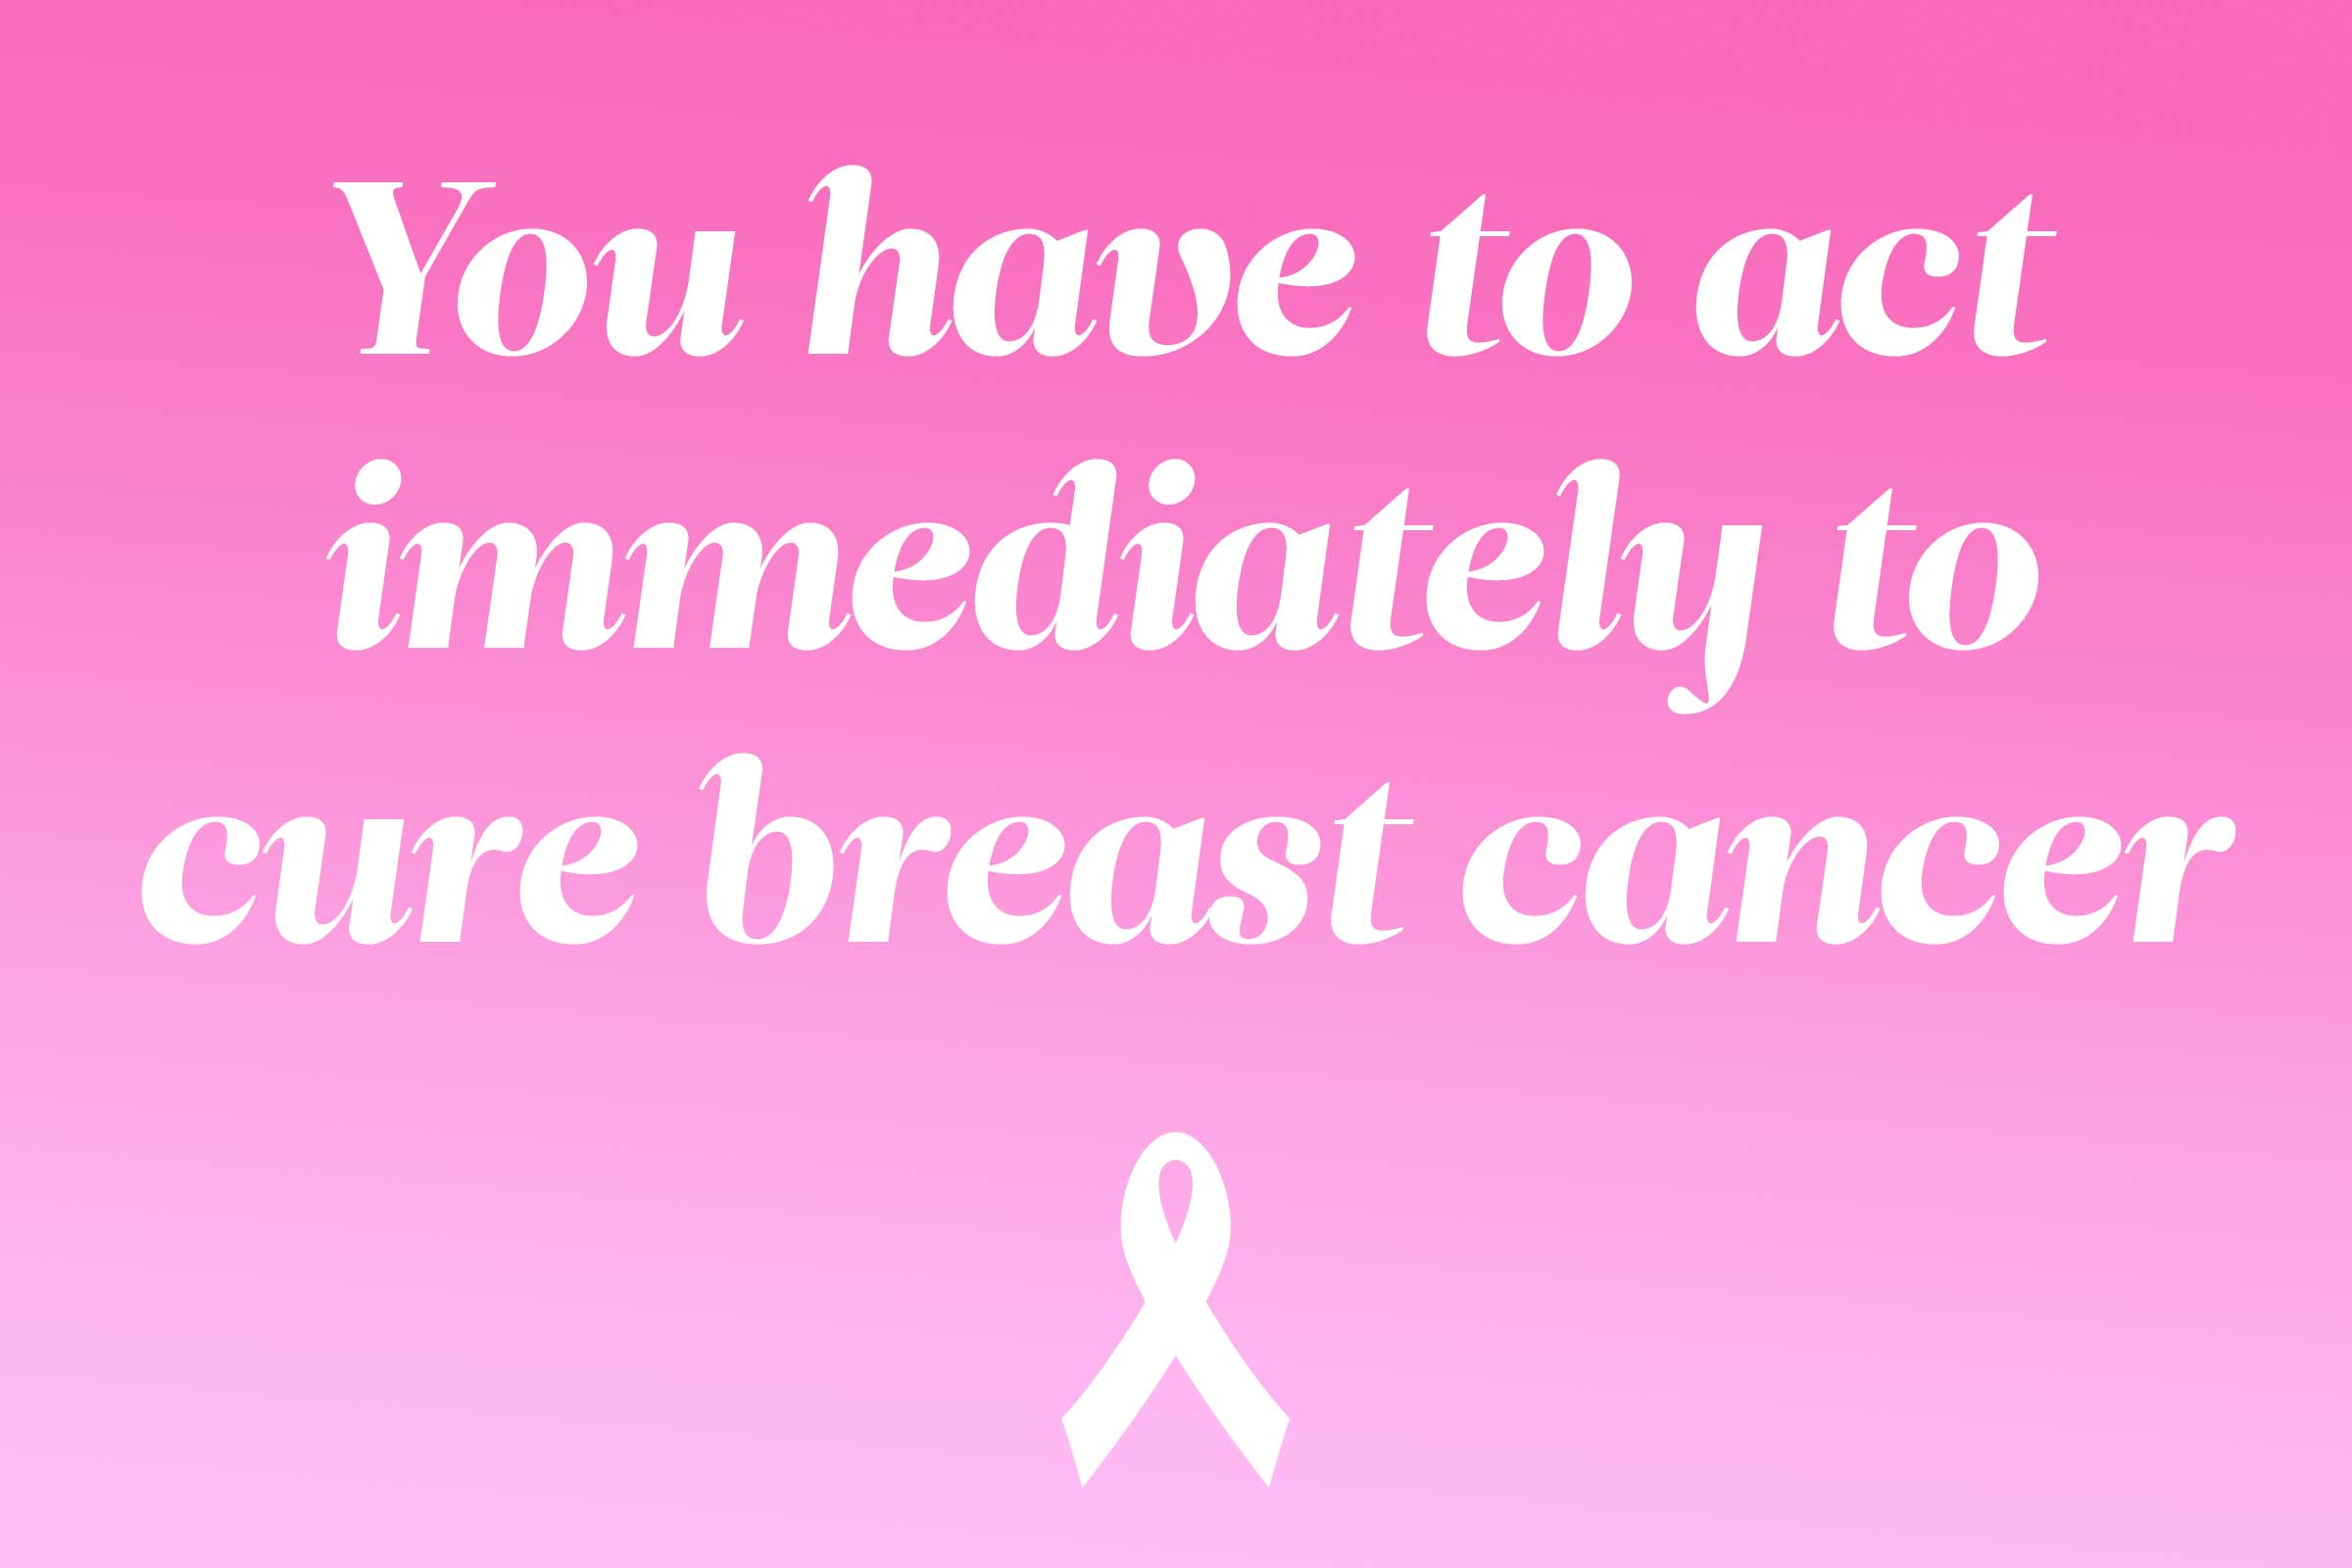 myth: you have to act immediately to cure breast cancer